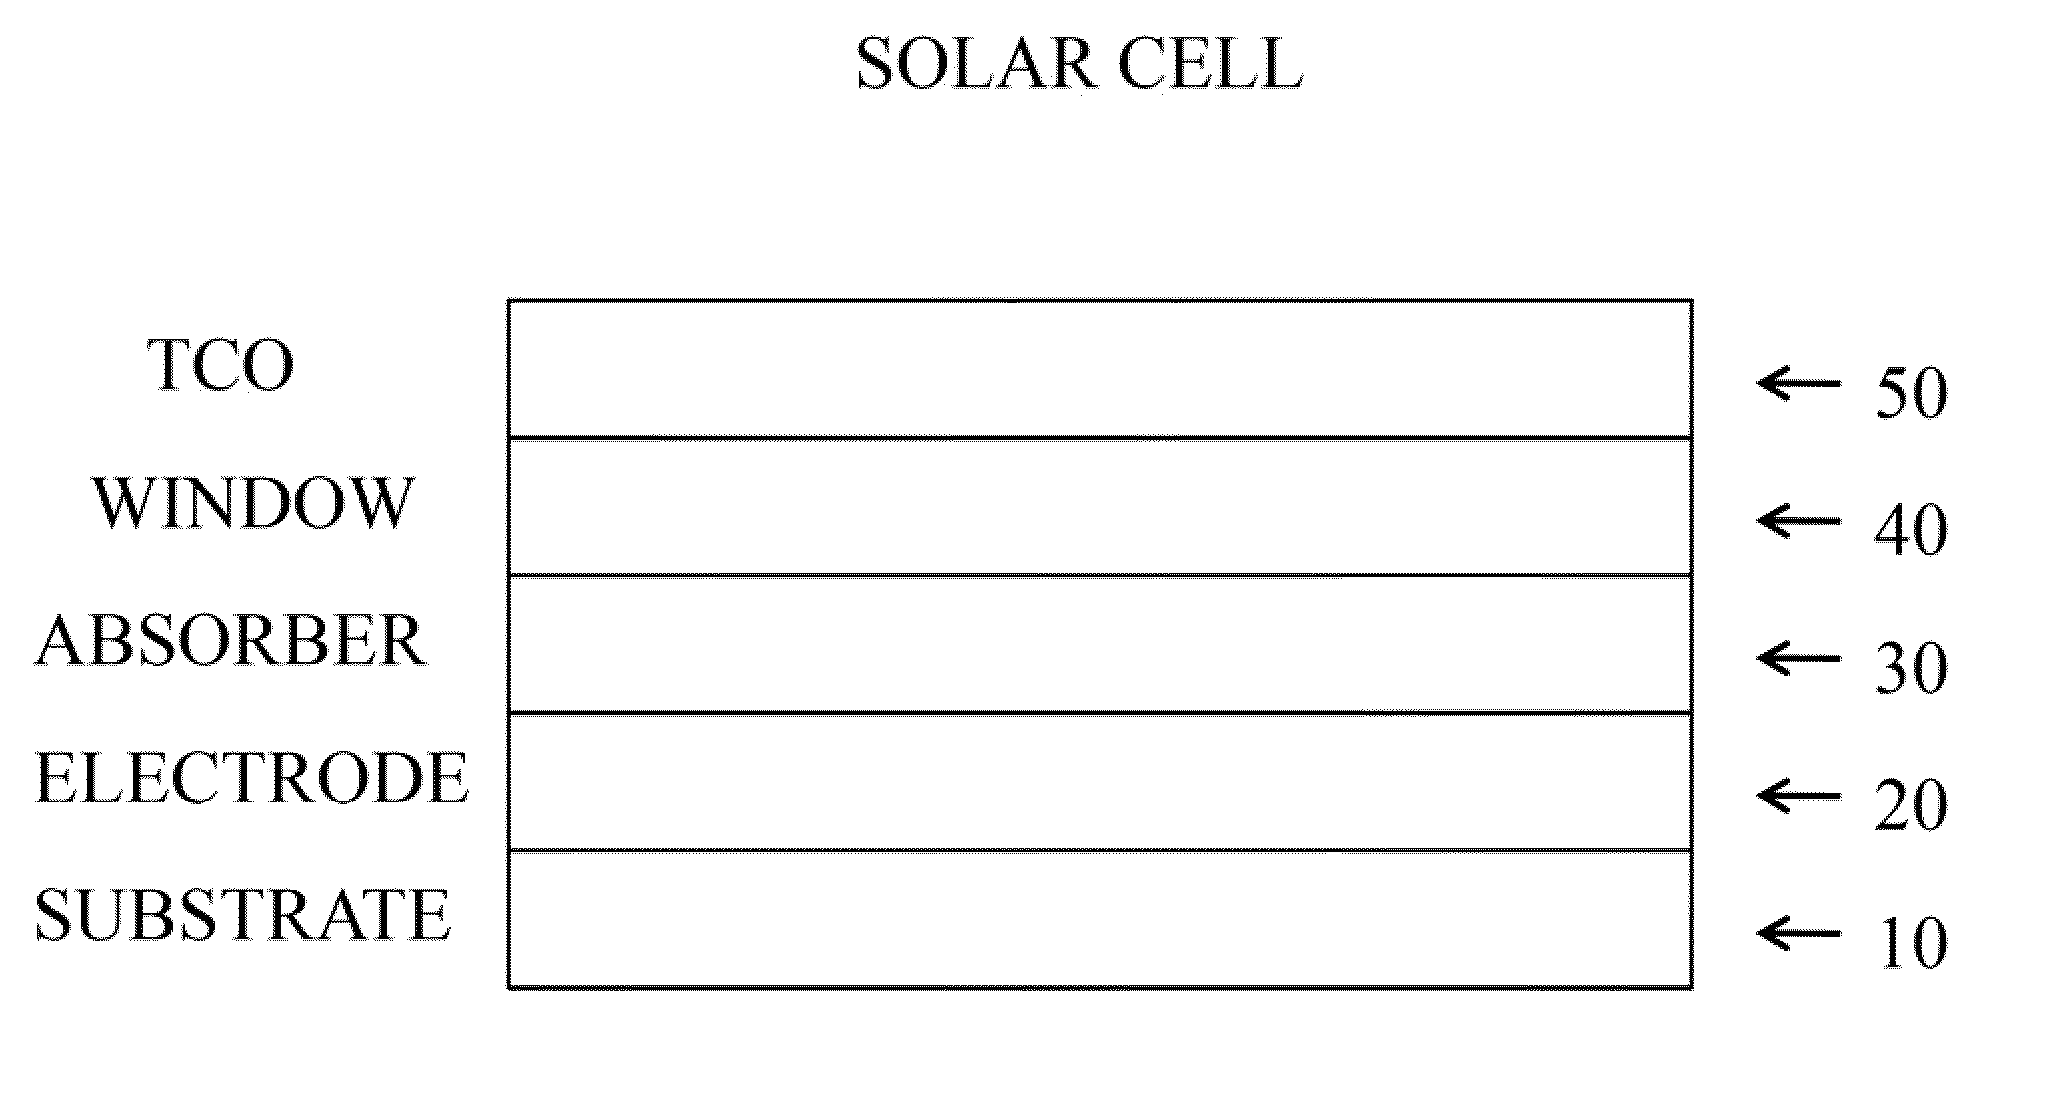 Methods and materials for cis and cigs photovoltaics